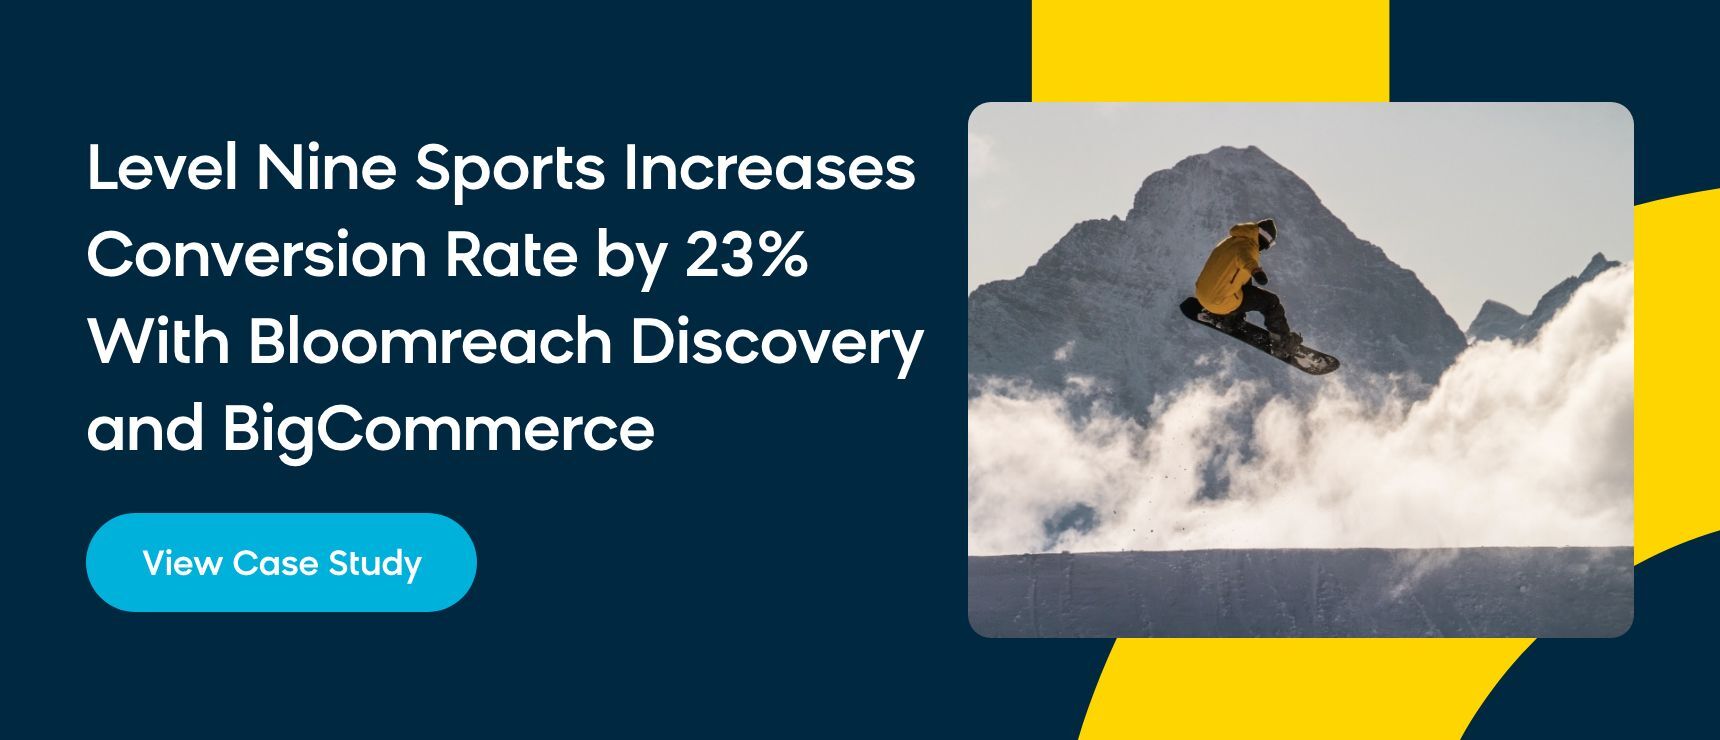 Level Nine Sports case study with Bloomreach